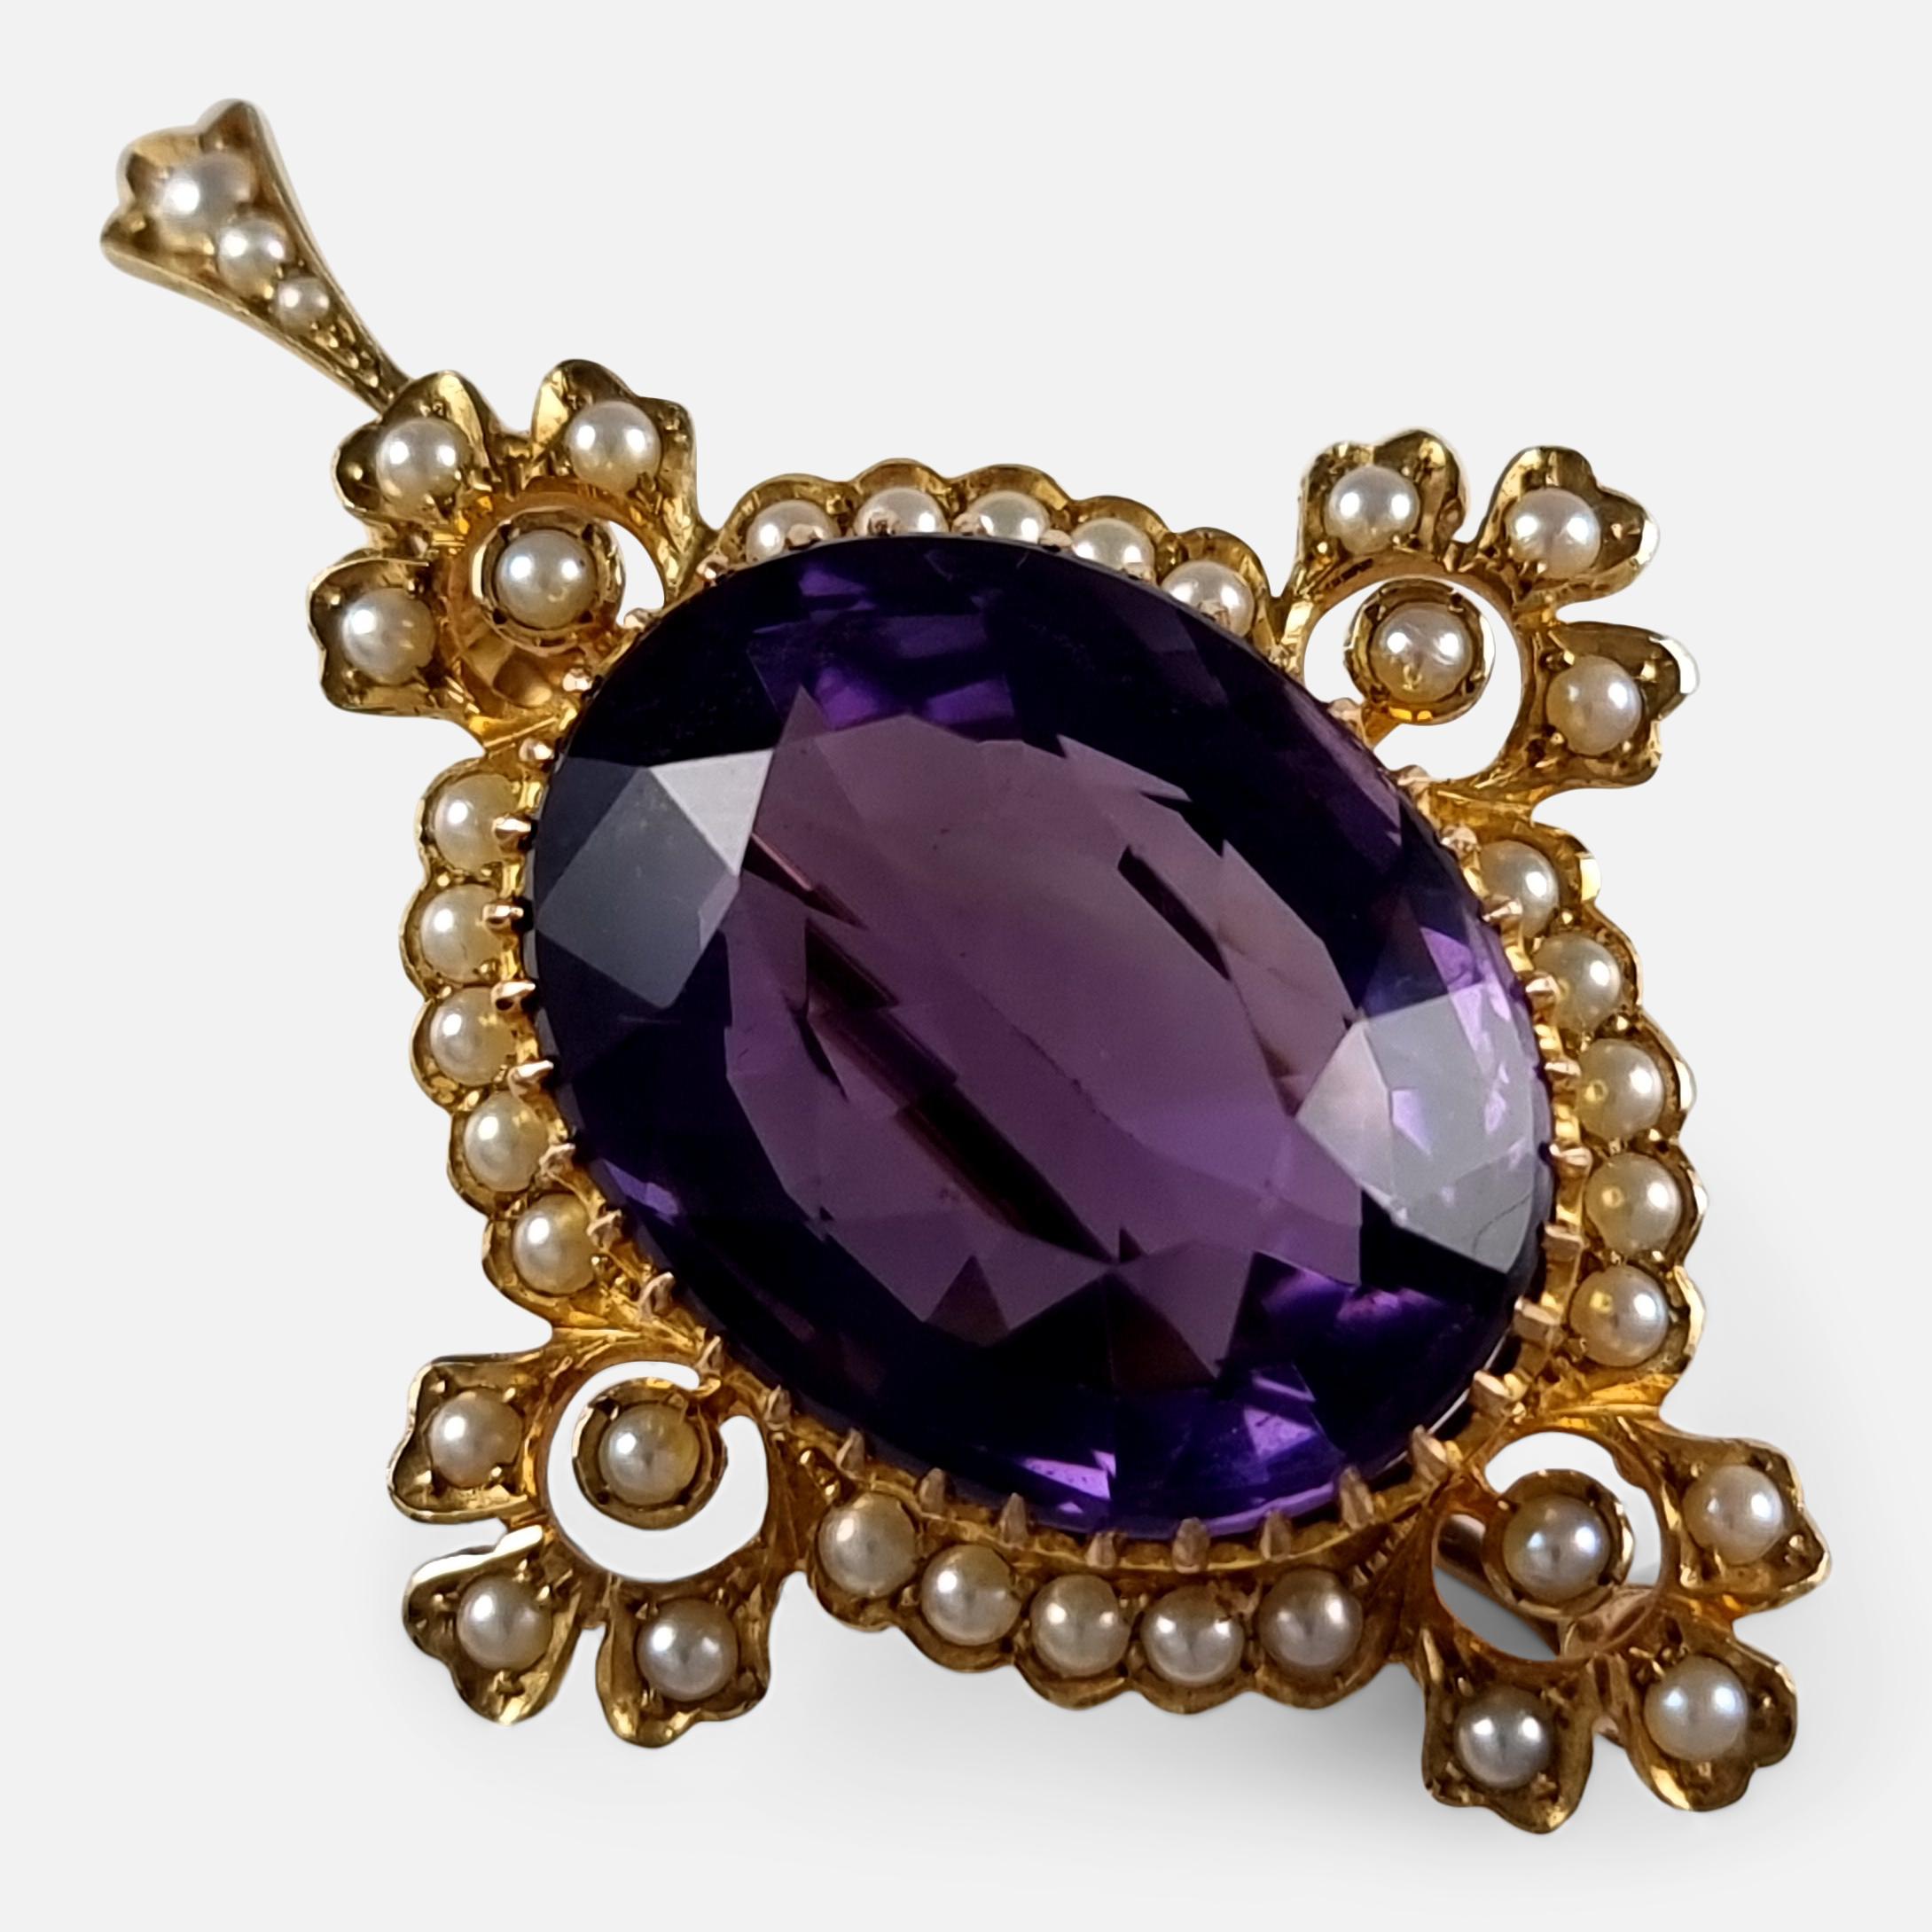 Women's Edwardian 15ct Gold Amethyst and Seed Pearl Pendant Brooch